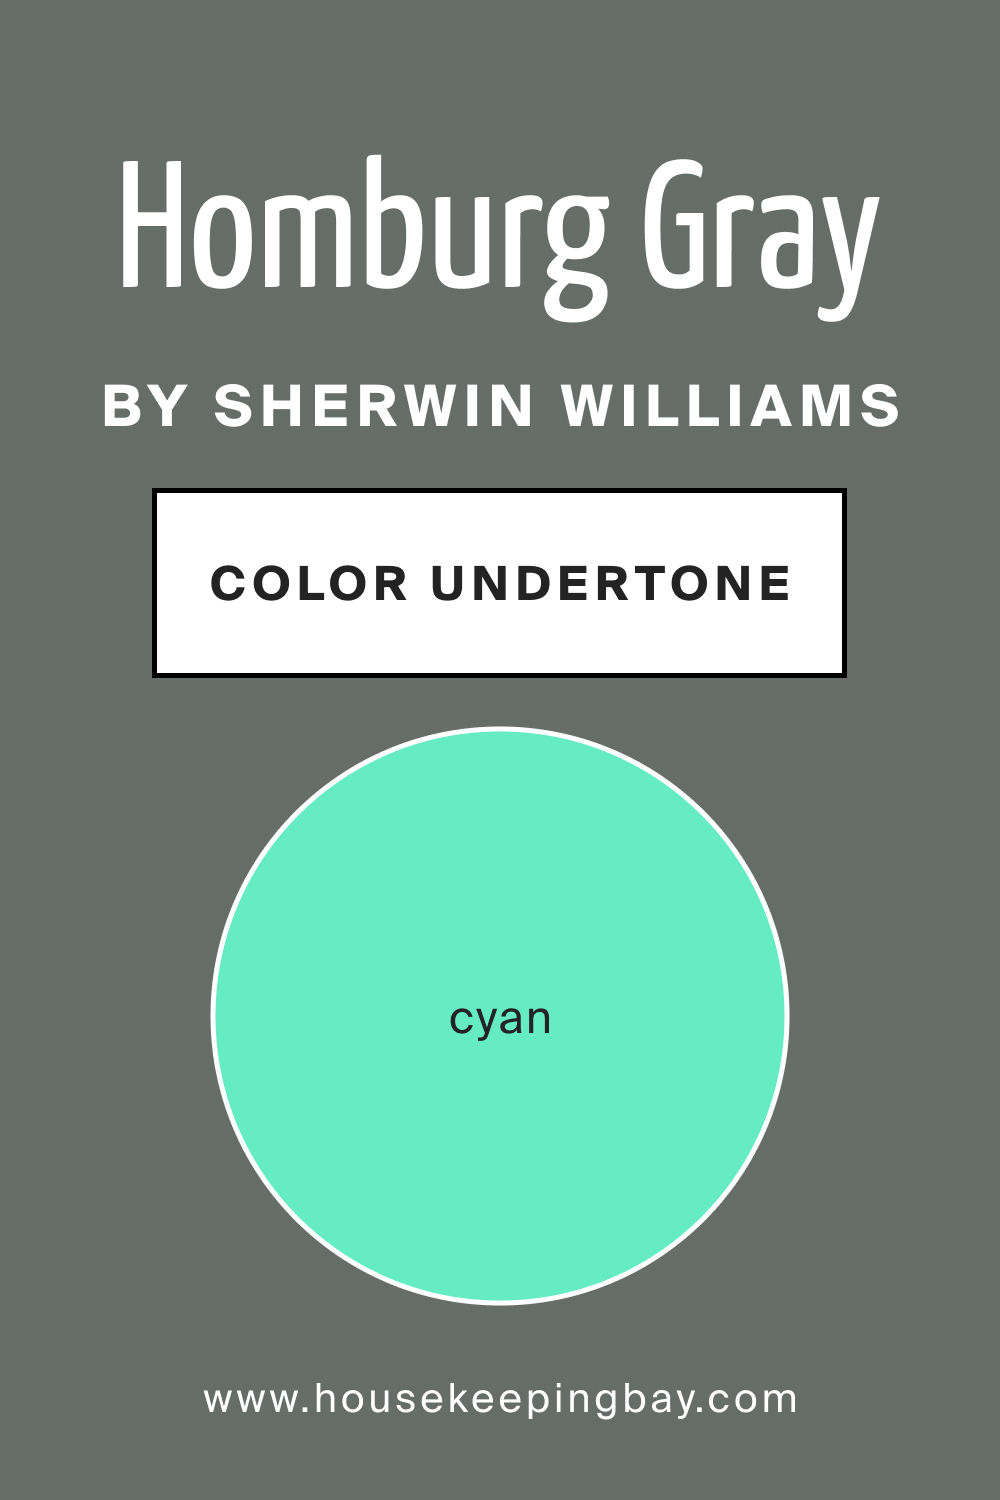 SW 7622 Homburg Gray by Sherwin Williams Color Undertone